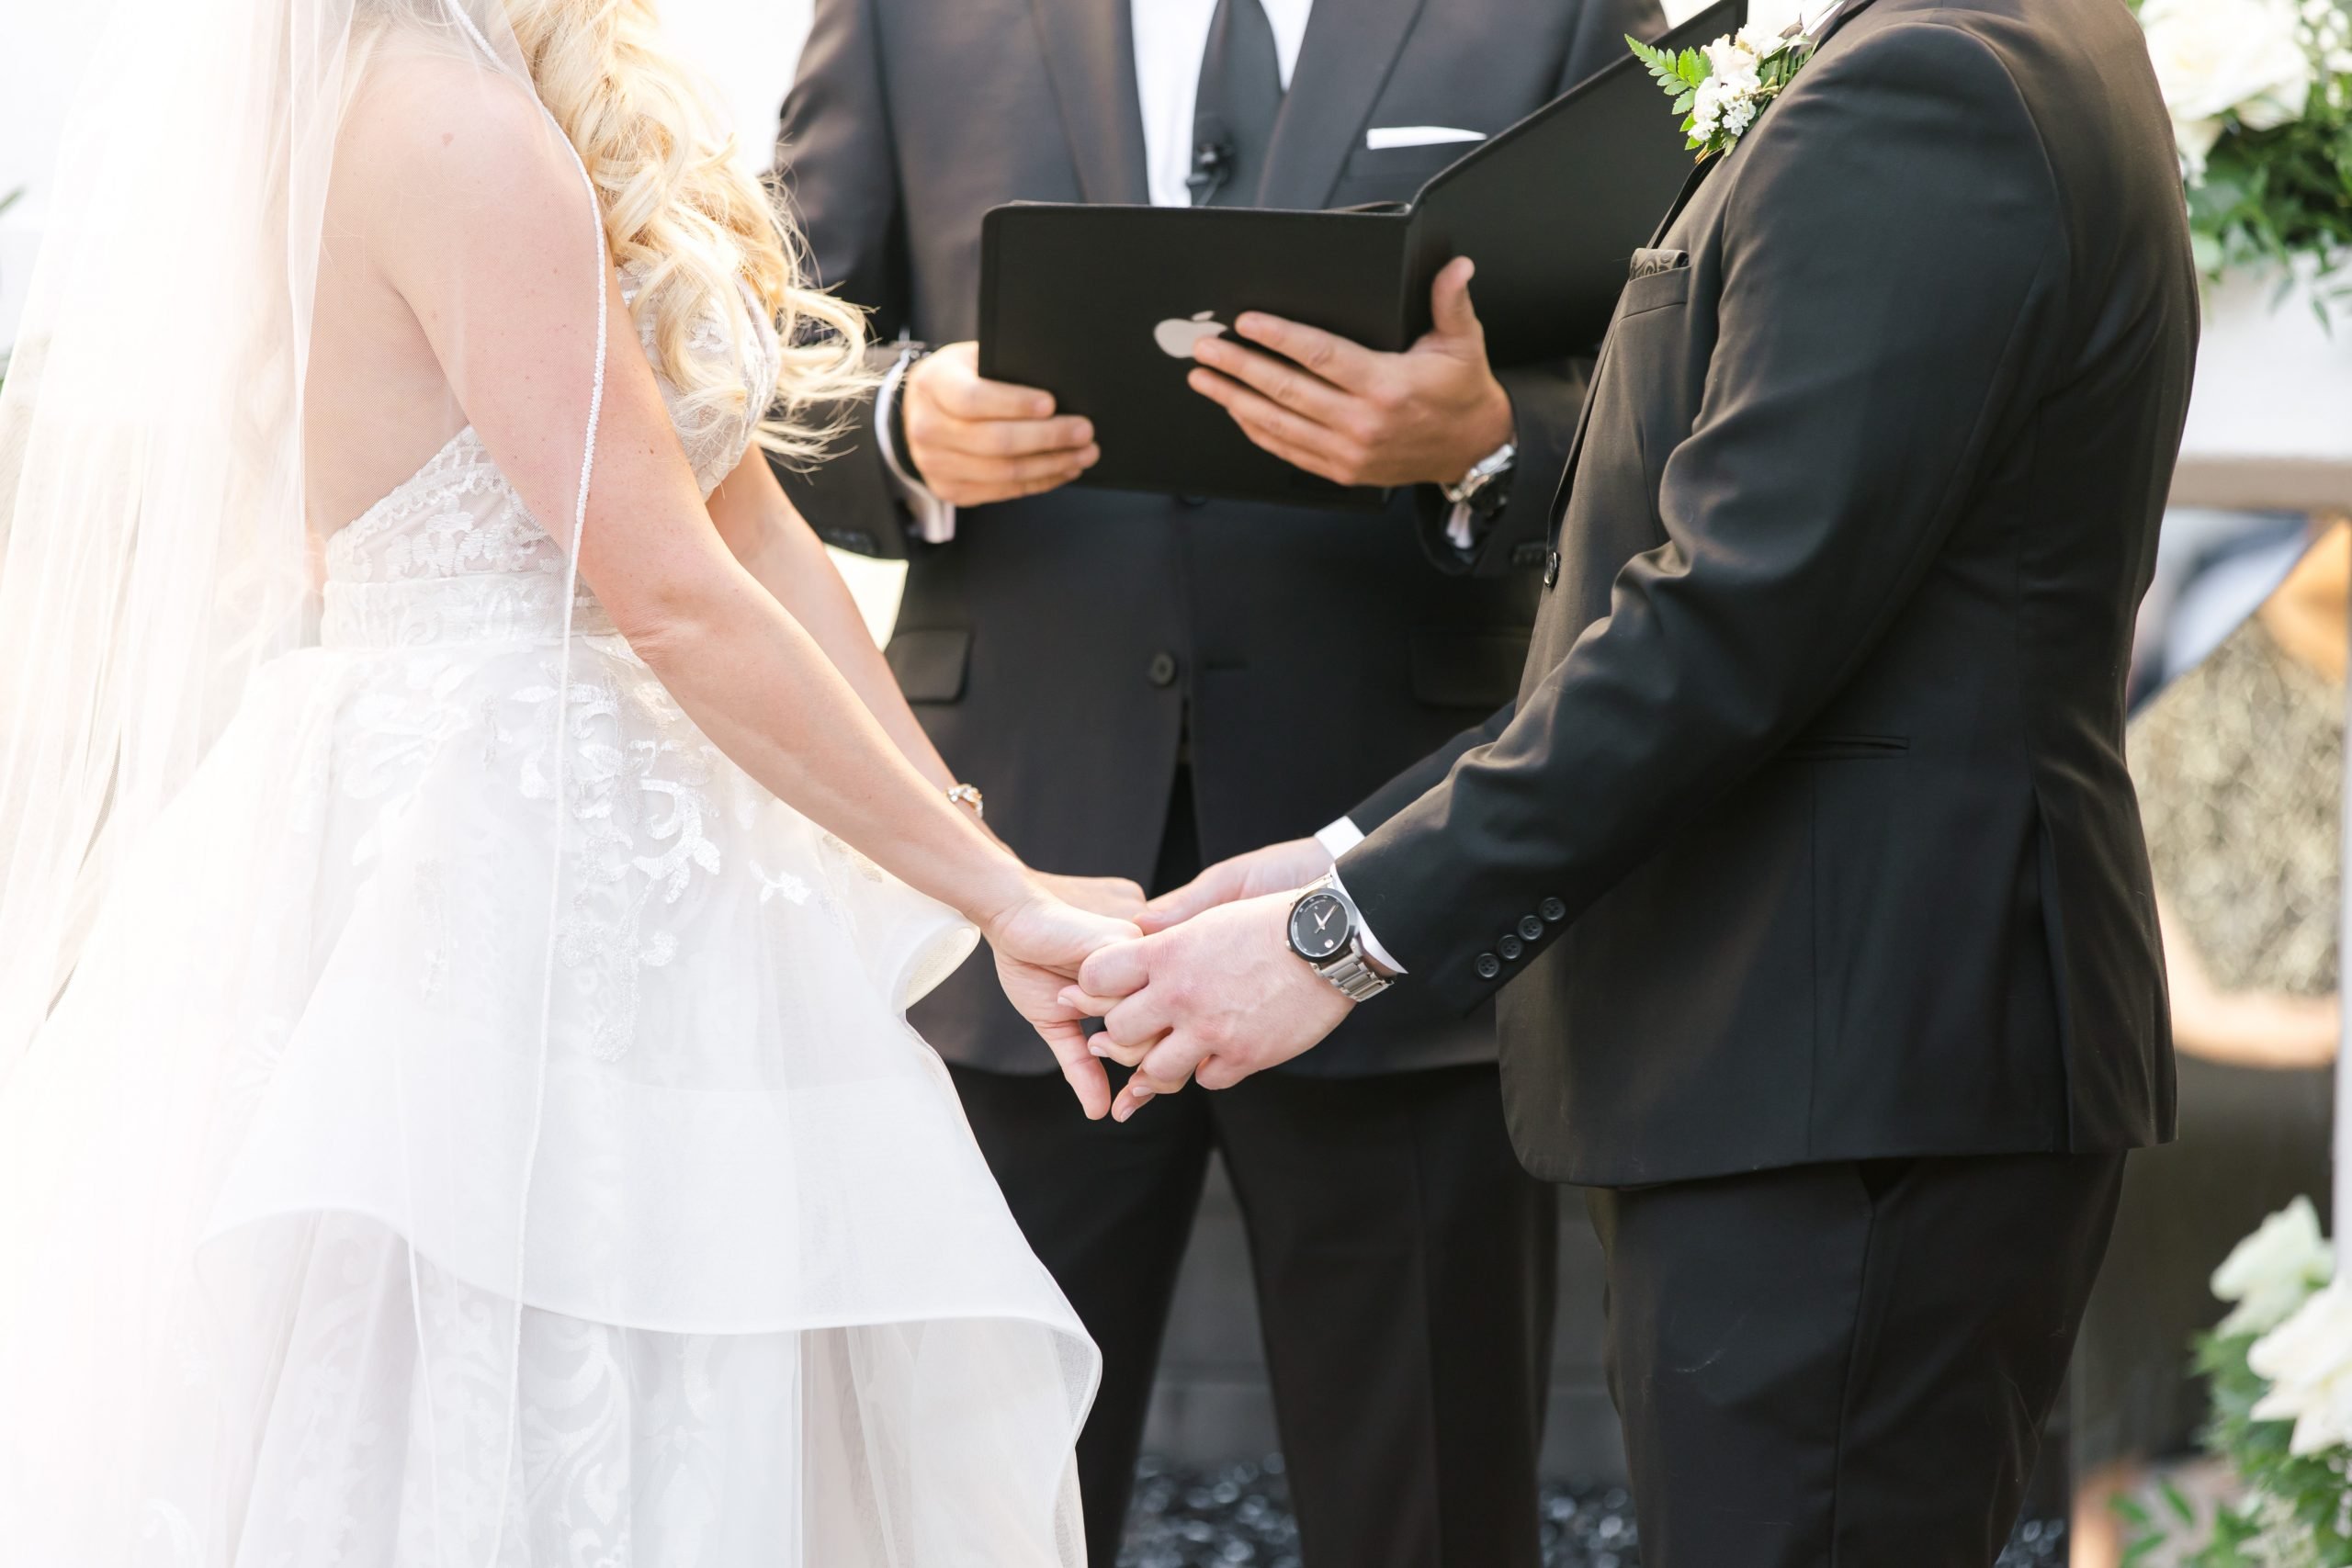 Choosing Your Wedding Officiant